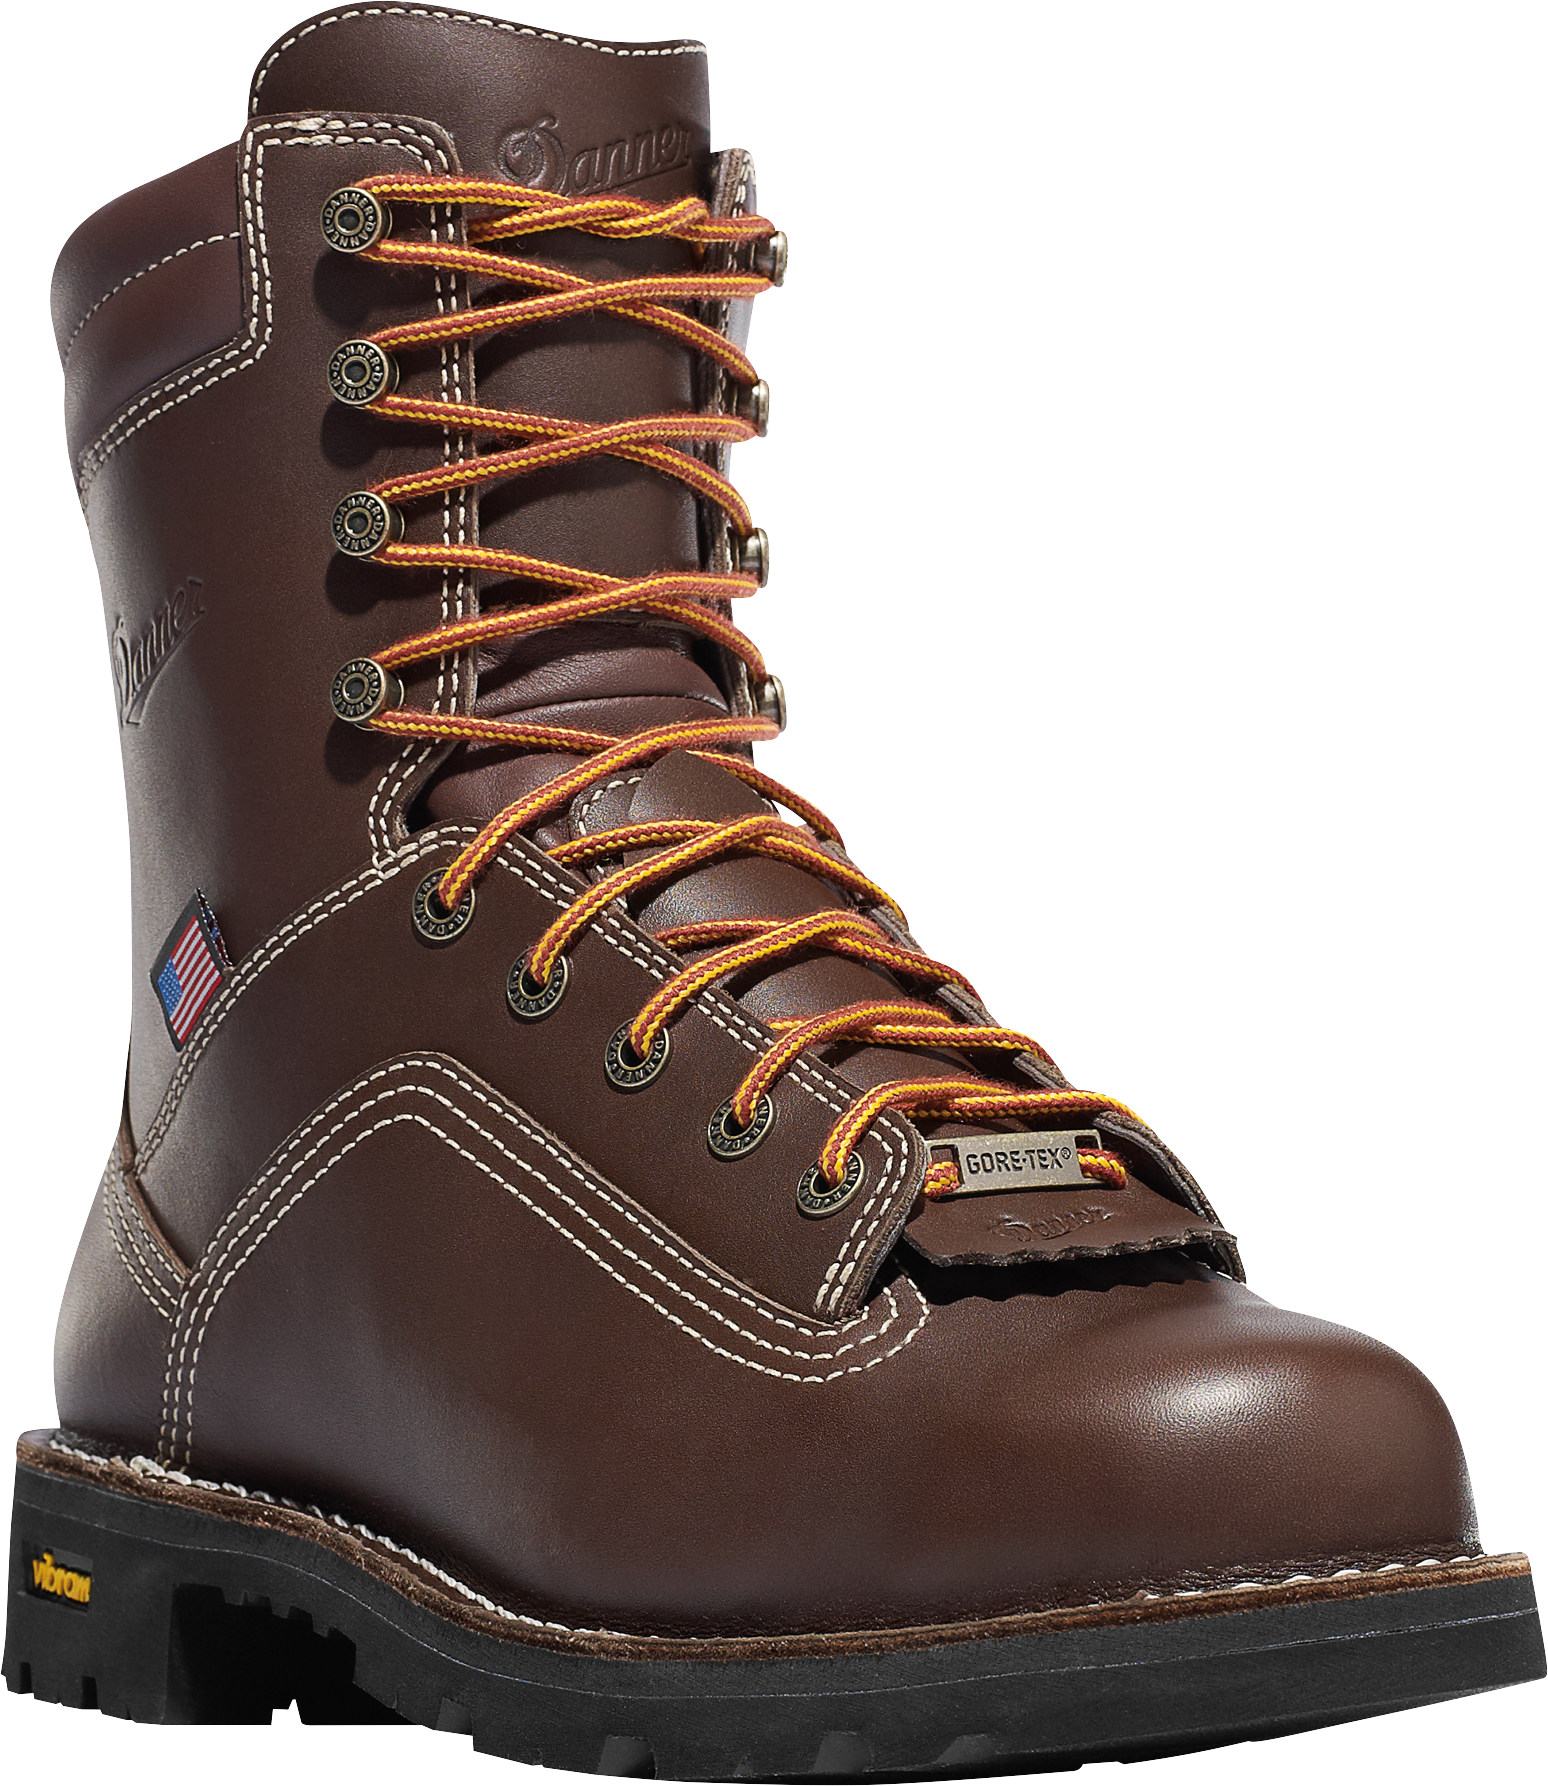 Danner Quarry USA GORE-TEX Work Boots for Men - Brown - 14M